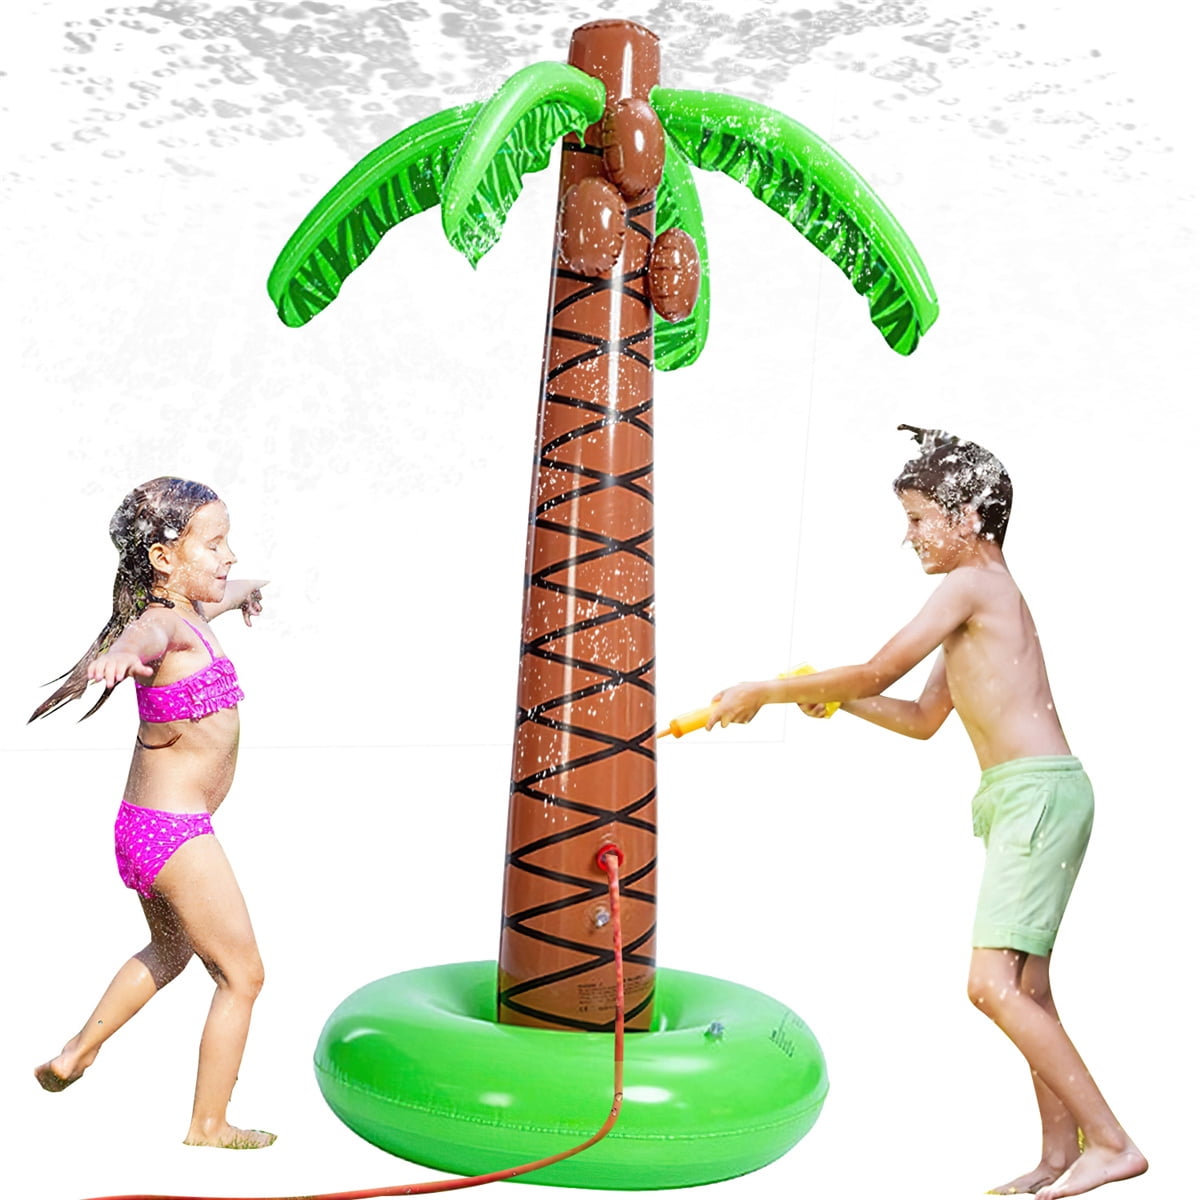 Details about   Spray Water Tree Toy For Outdoor Summer Inflatable Sprinkler Palm Water Play Toy 